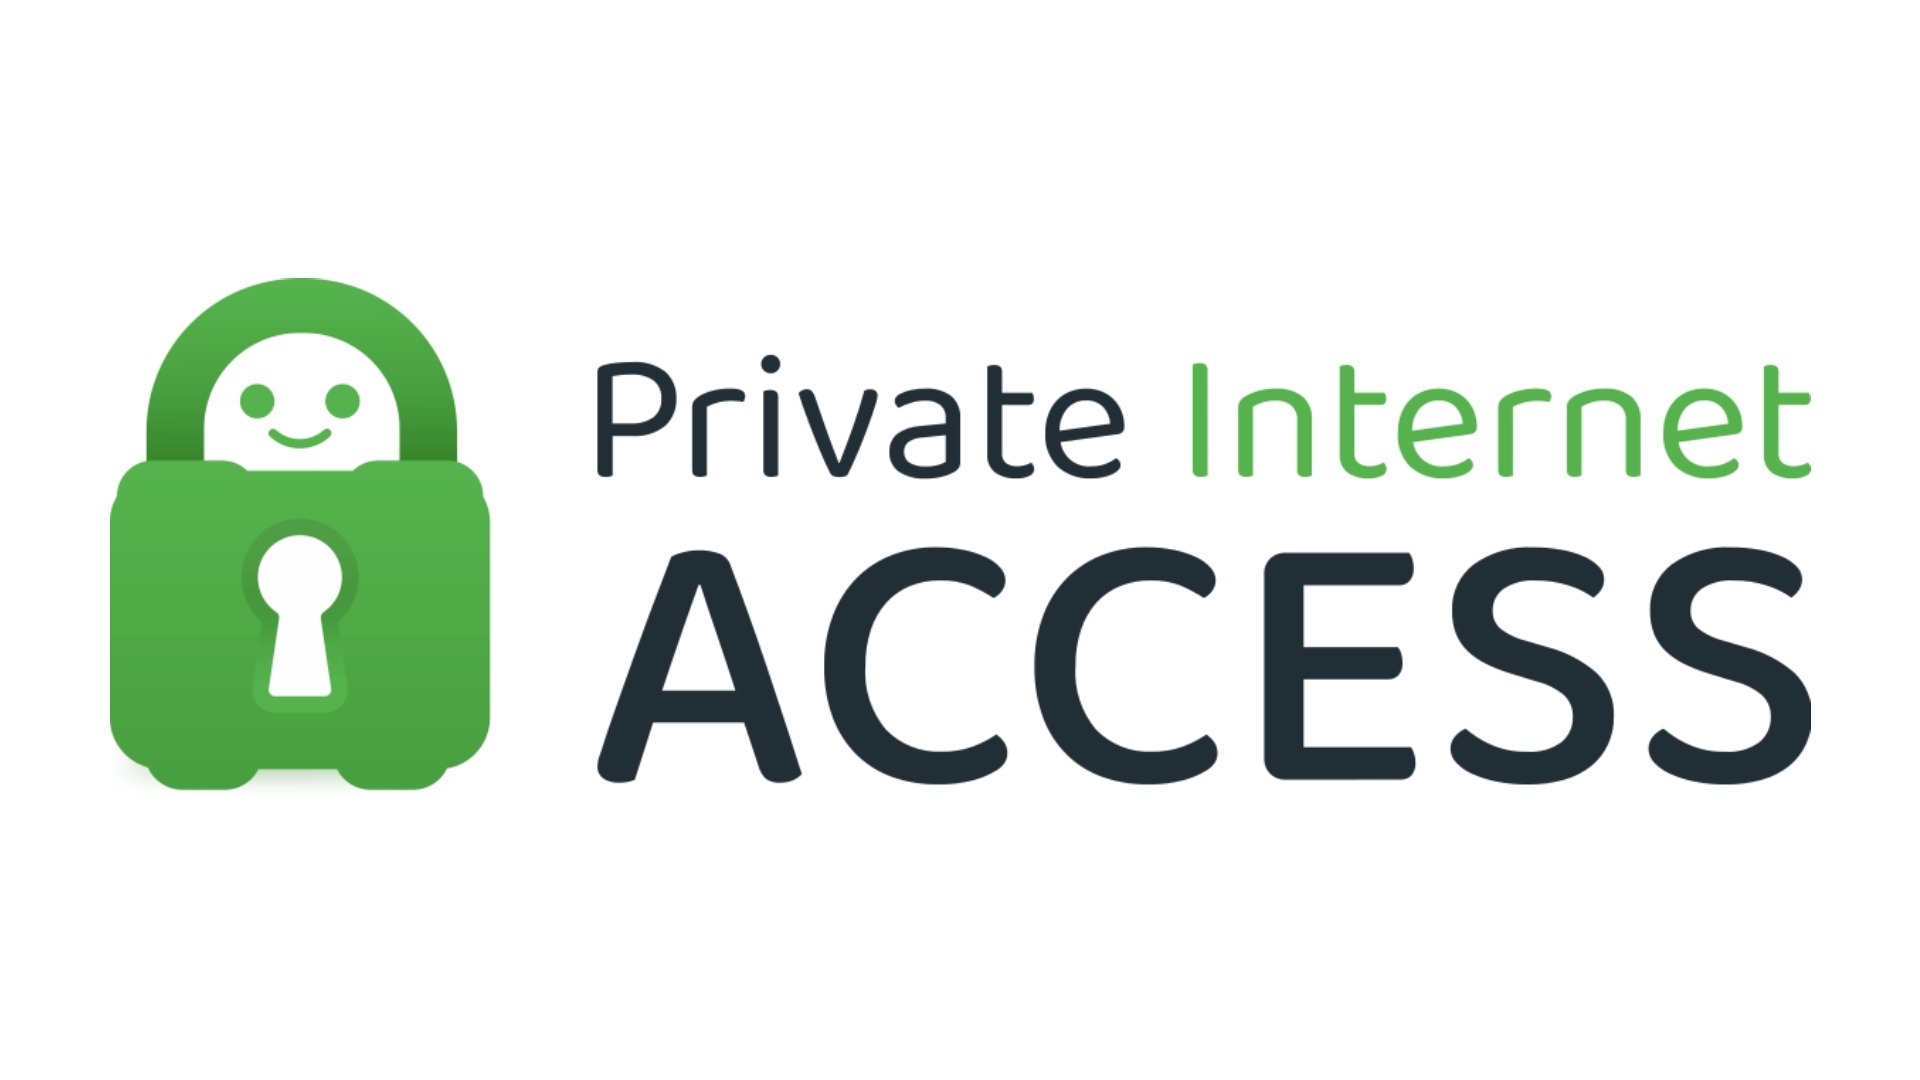 Best cheap VPN, option 3 - Private Internet Access. Image shows the business's logo.